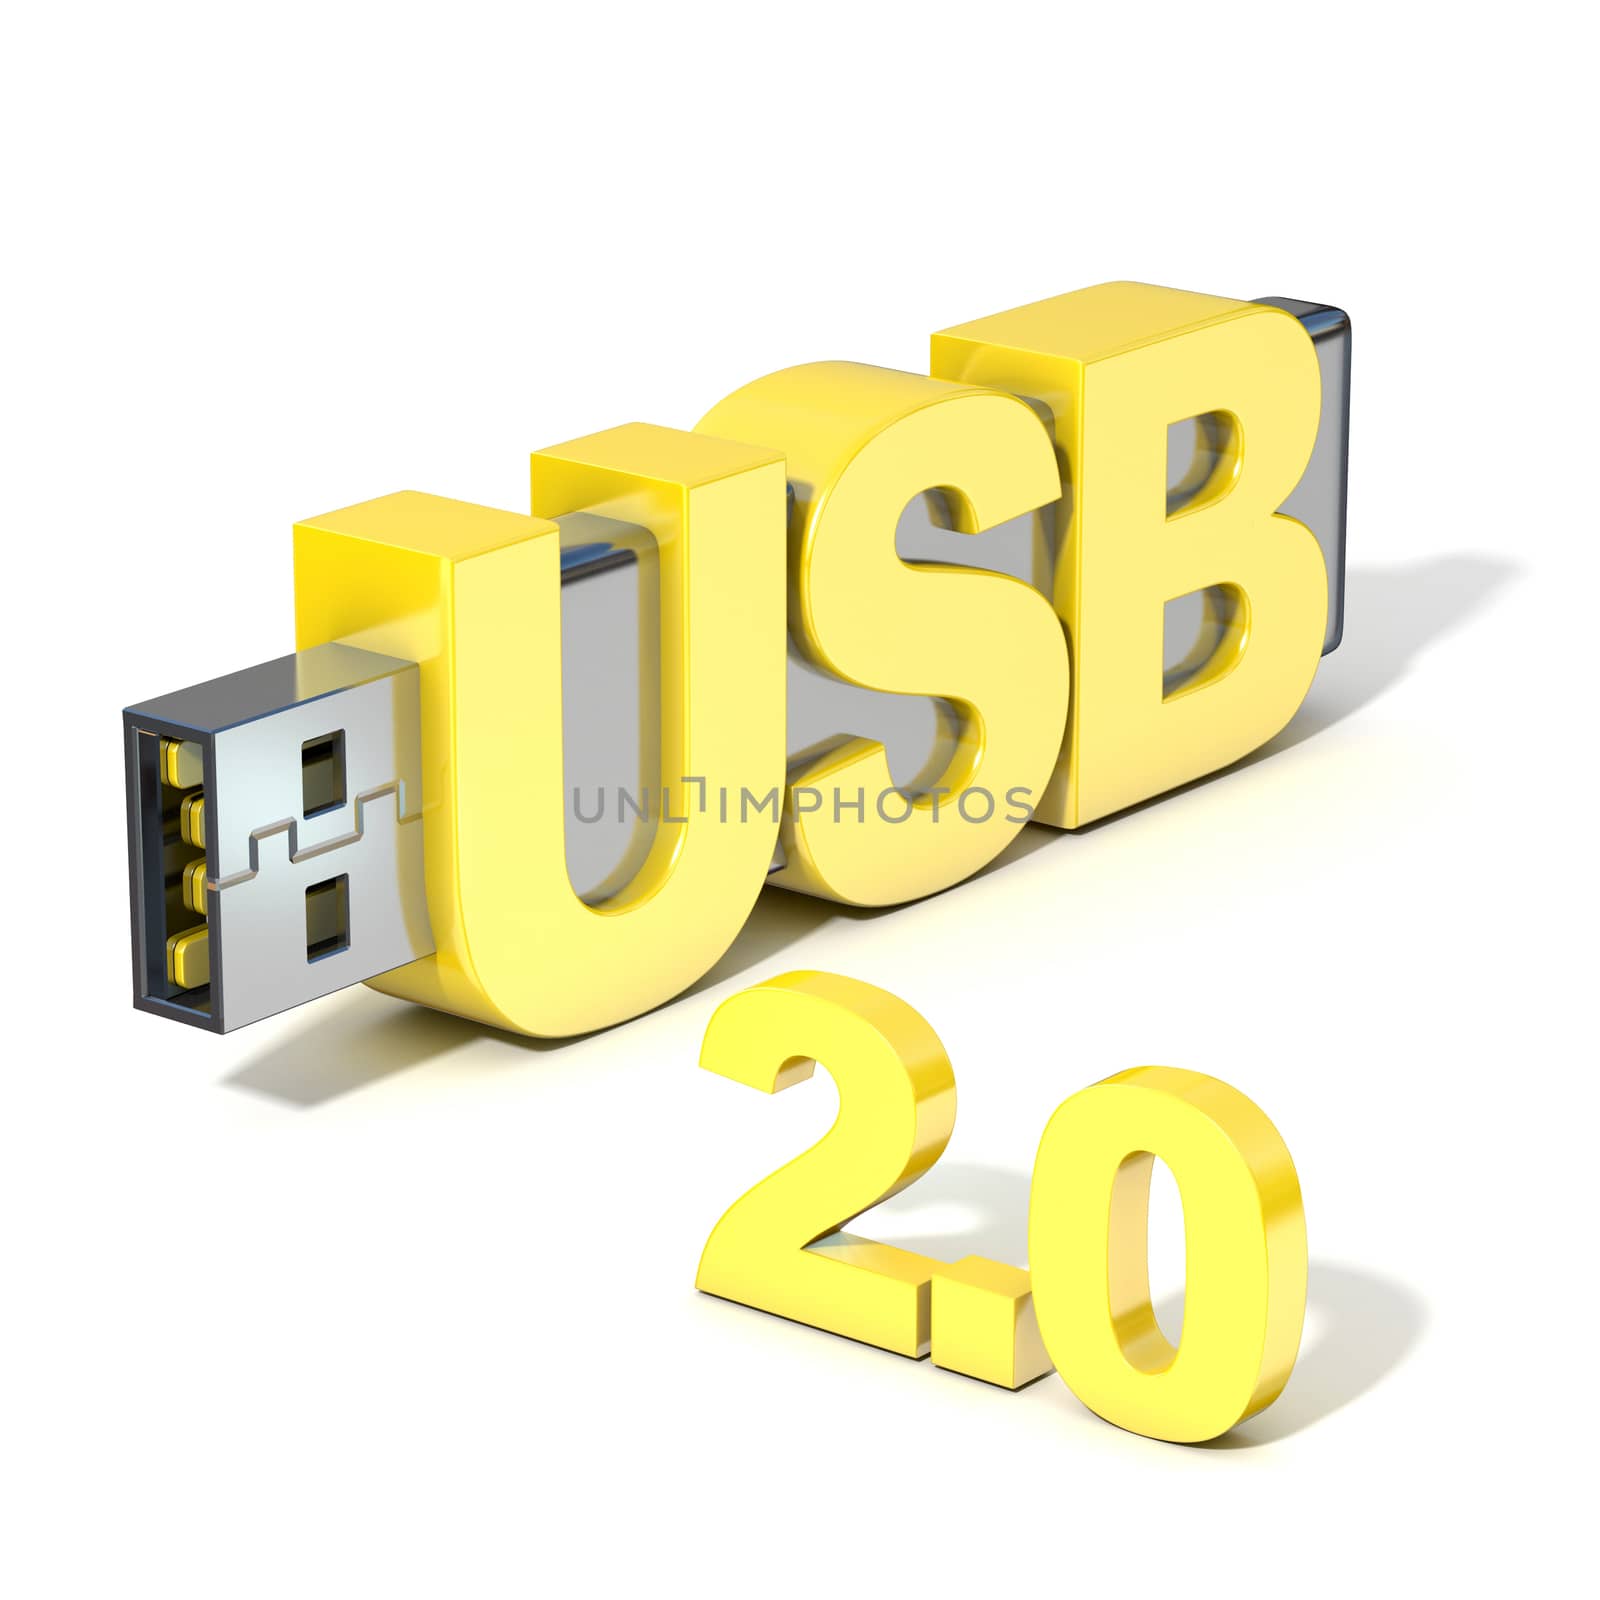 USB flash memory 2.0, made with the word USB. 3D by djmilic